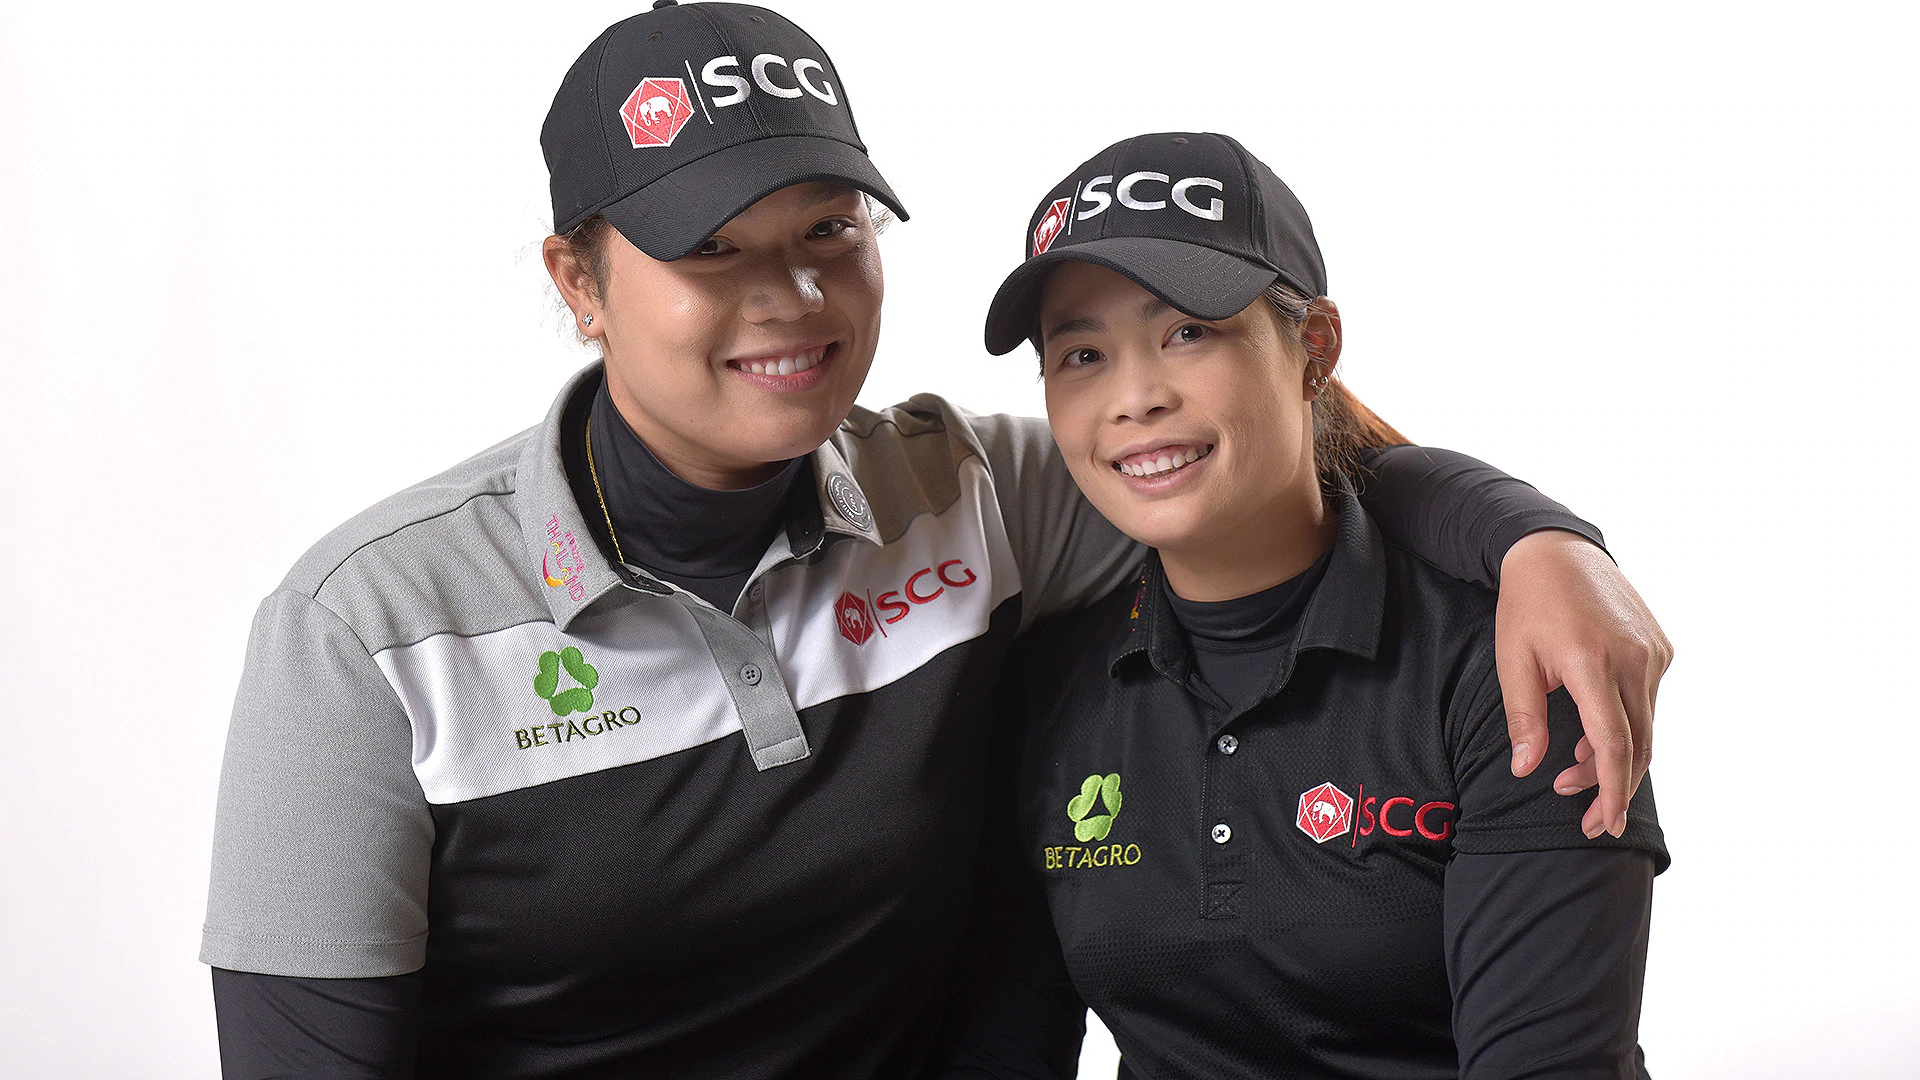 Jutanugarn sister both test positive for COVID-19, WD from upcoming event